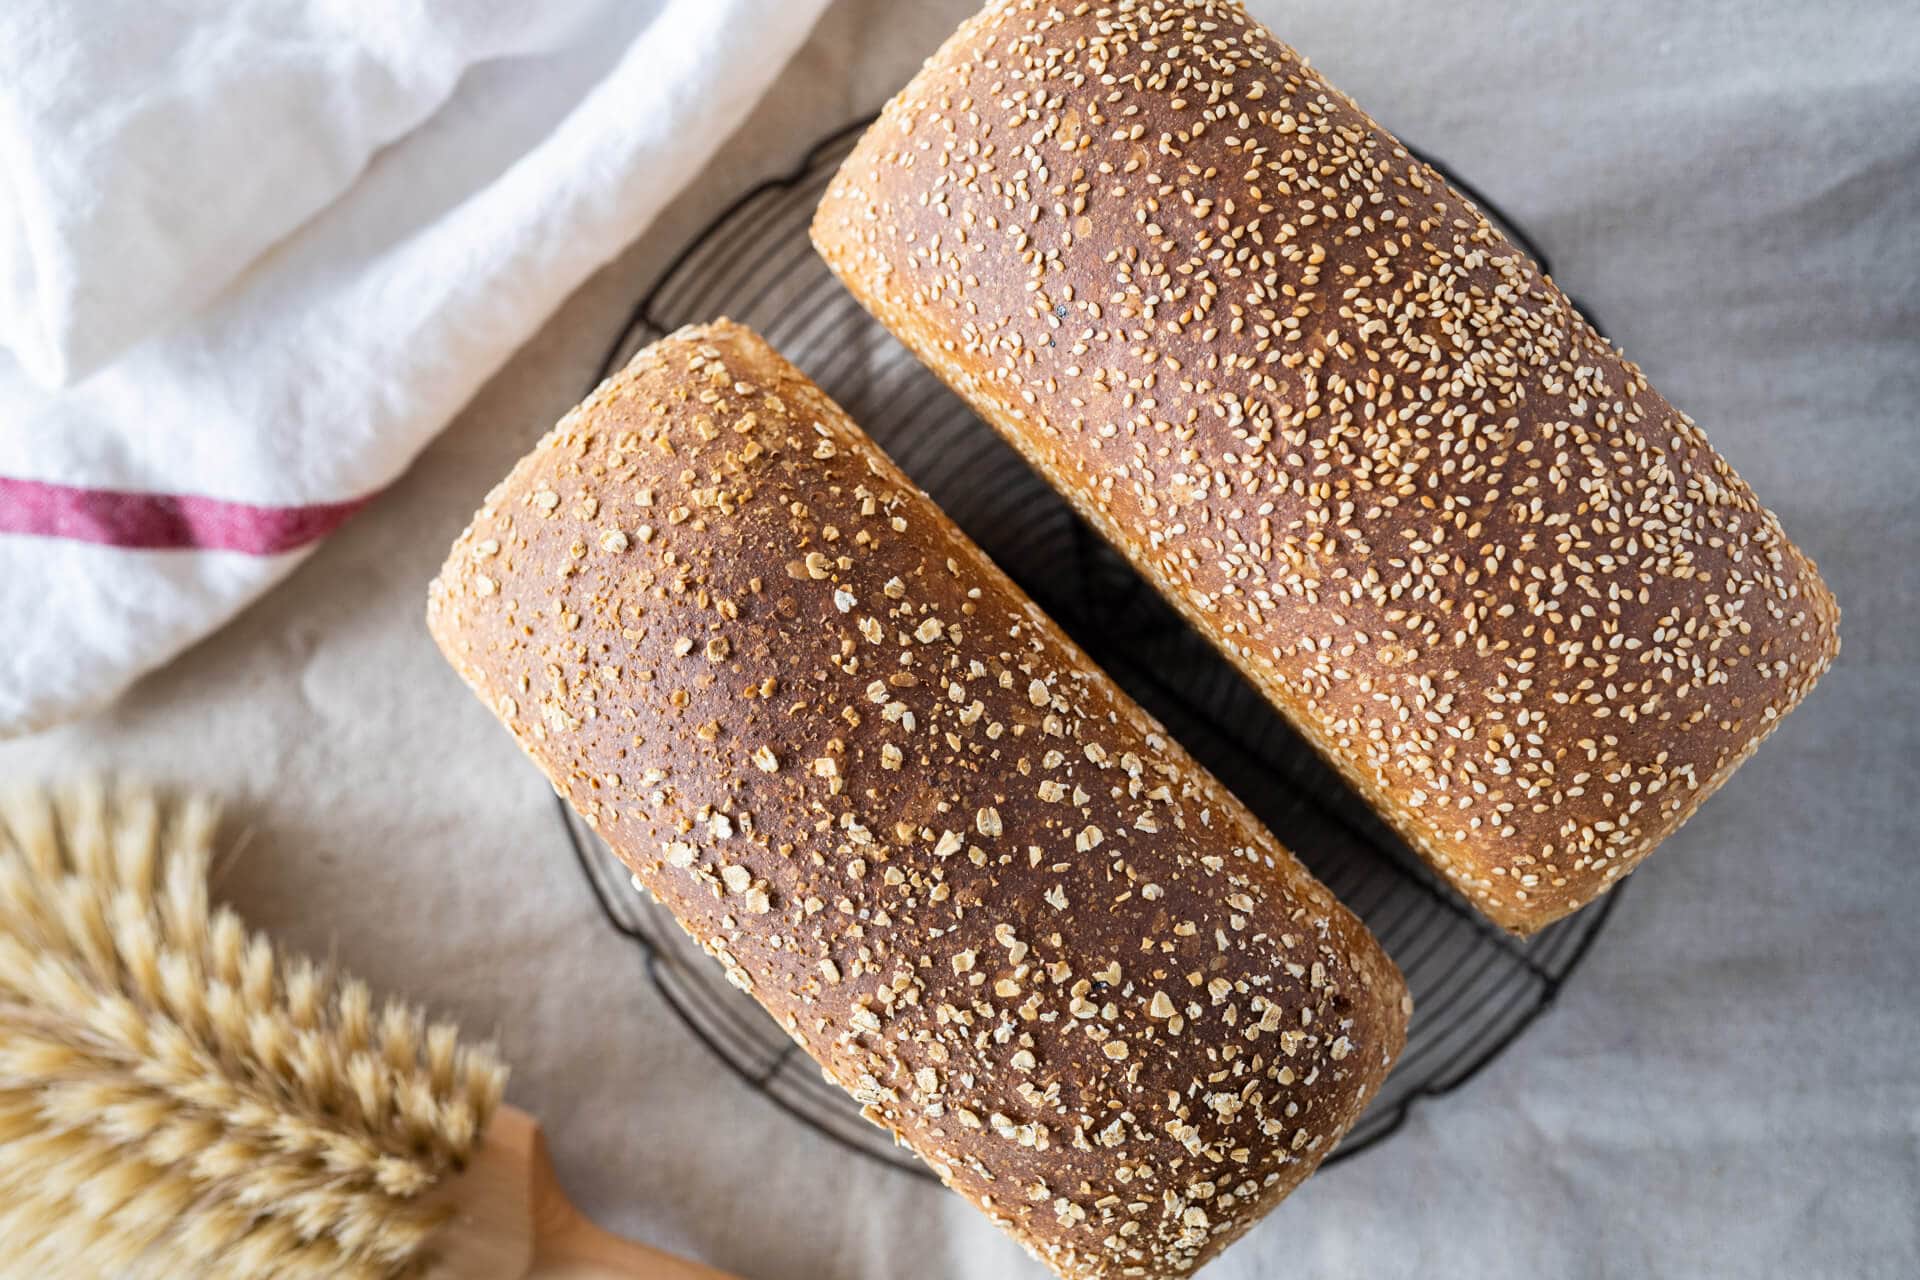 Sourdough sandwich bread with pre-cooked flour crust topped with oats and white sesame